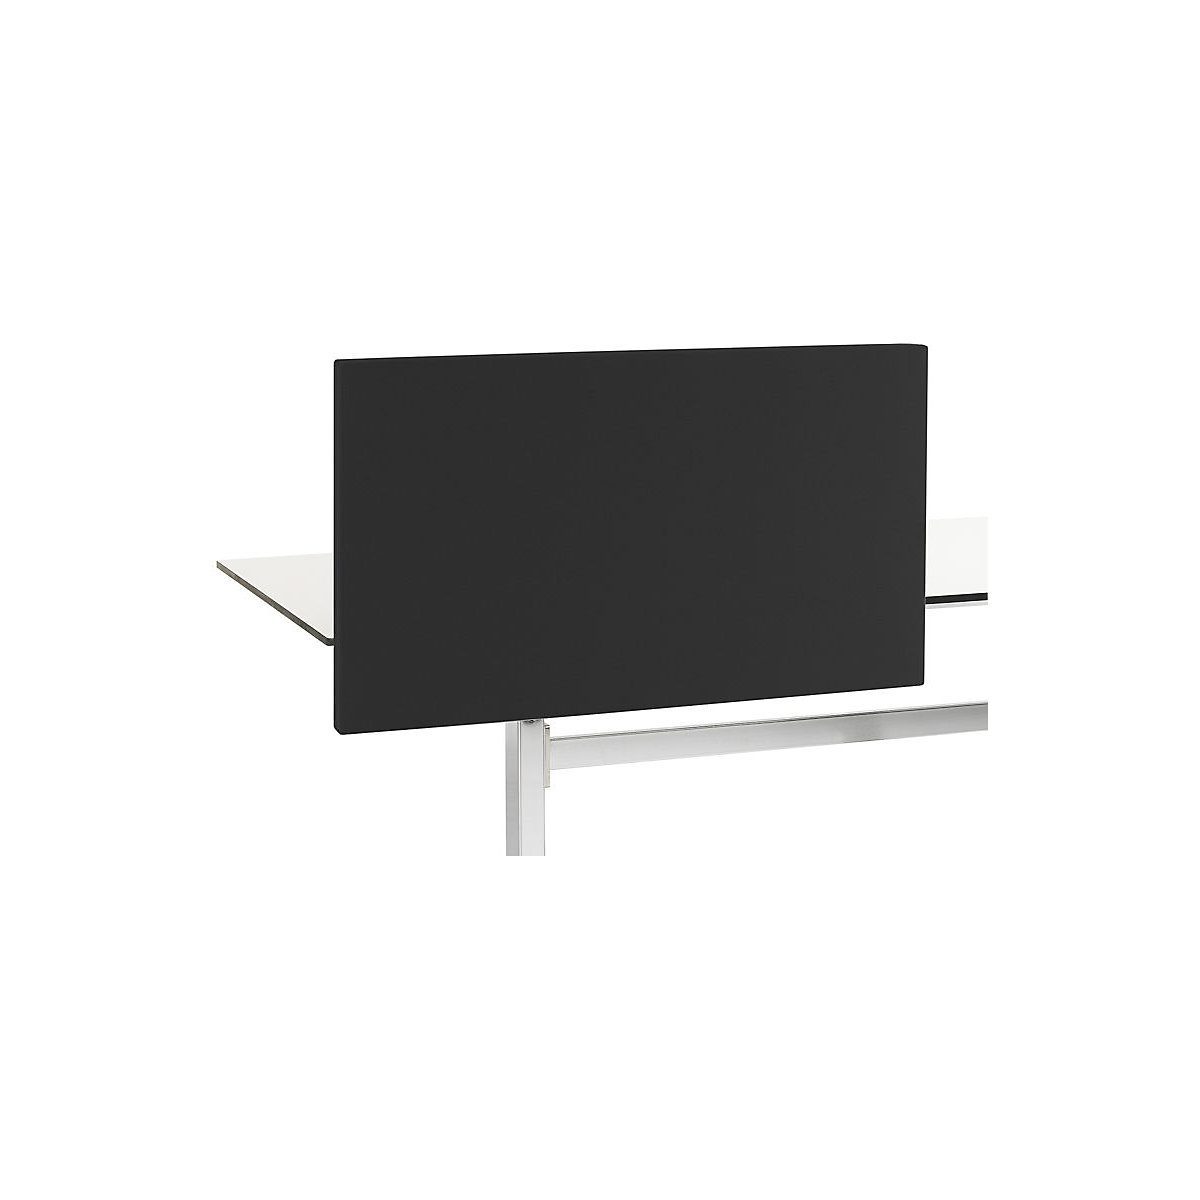 Standard acoustic desk partition with straight corners, HxW 650 x 2000 mm, fabric, black-1